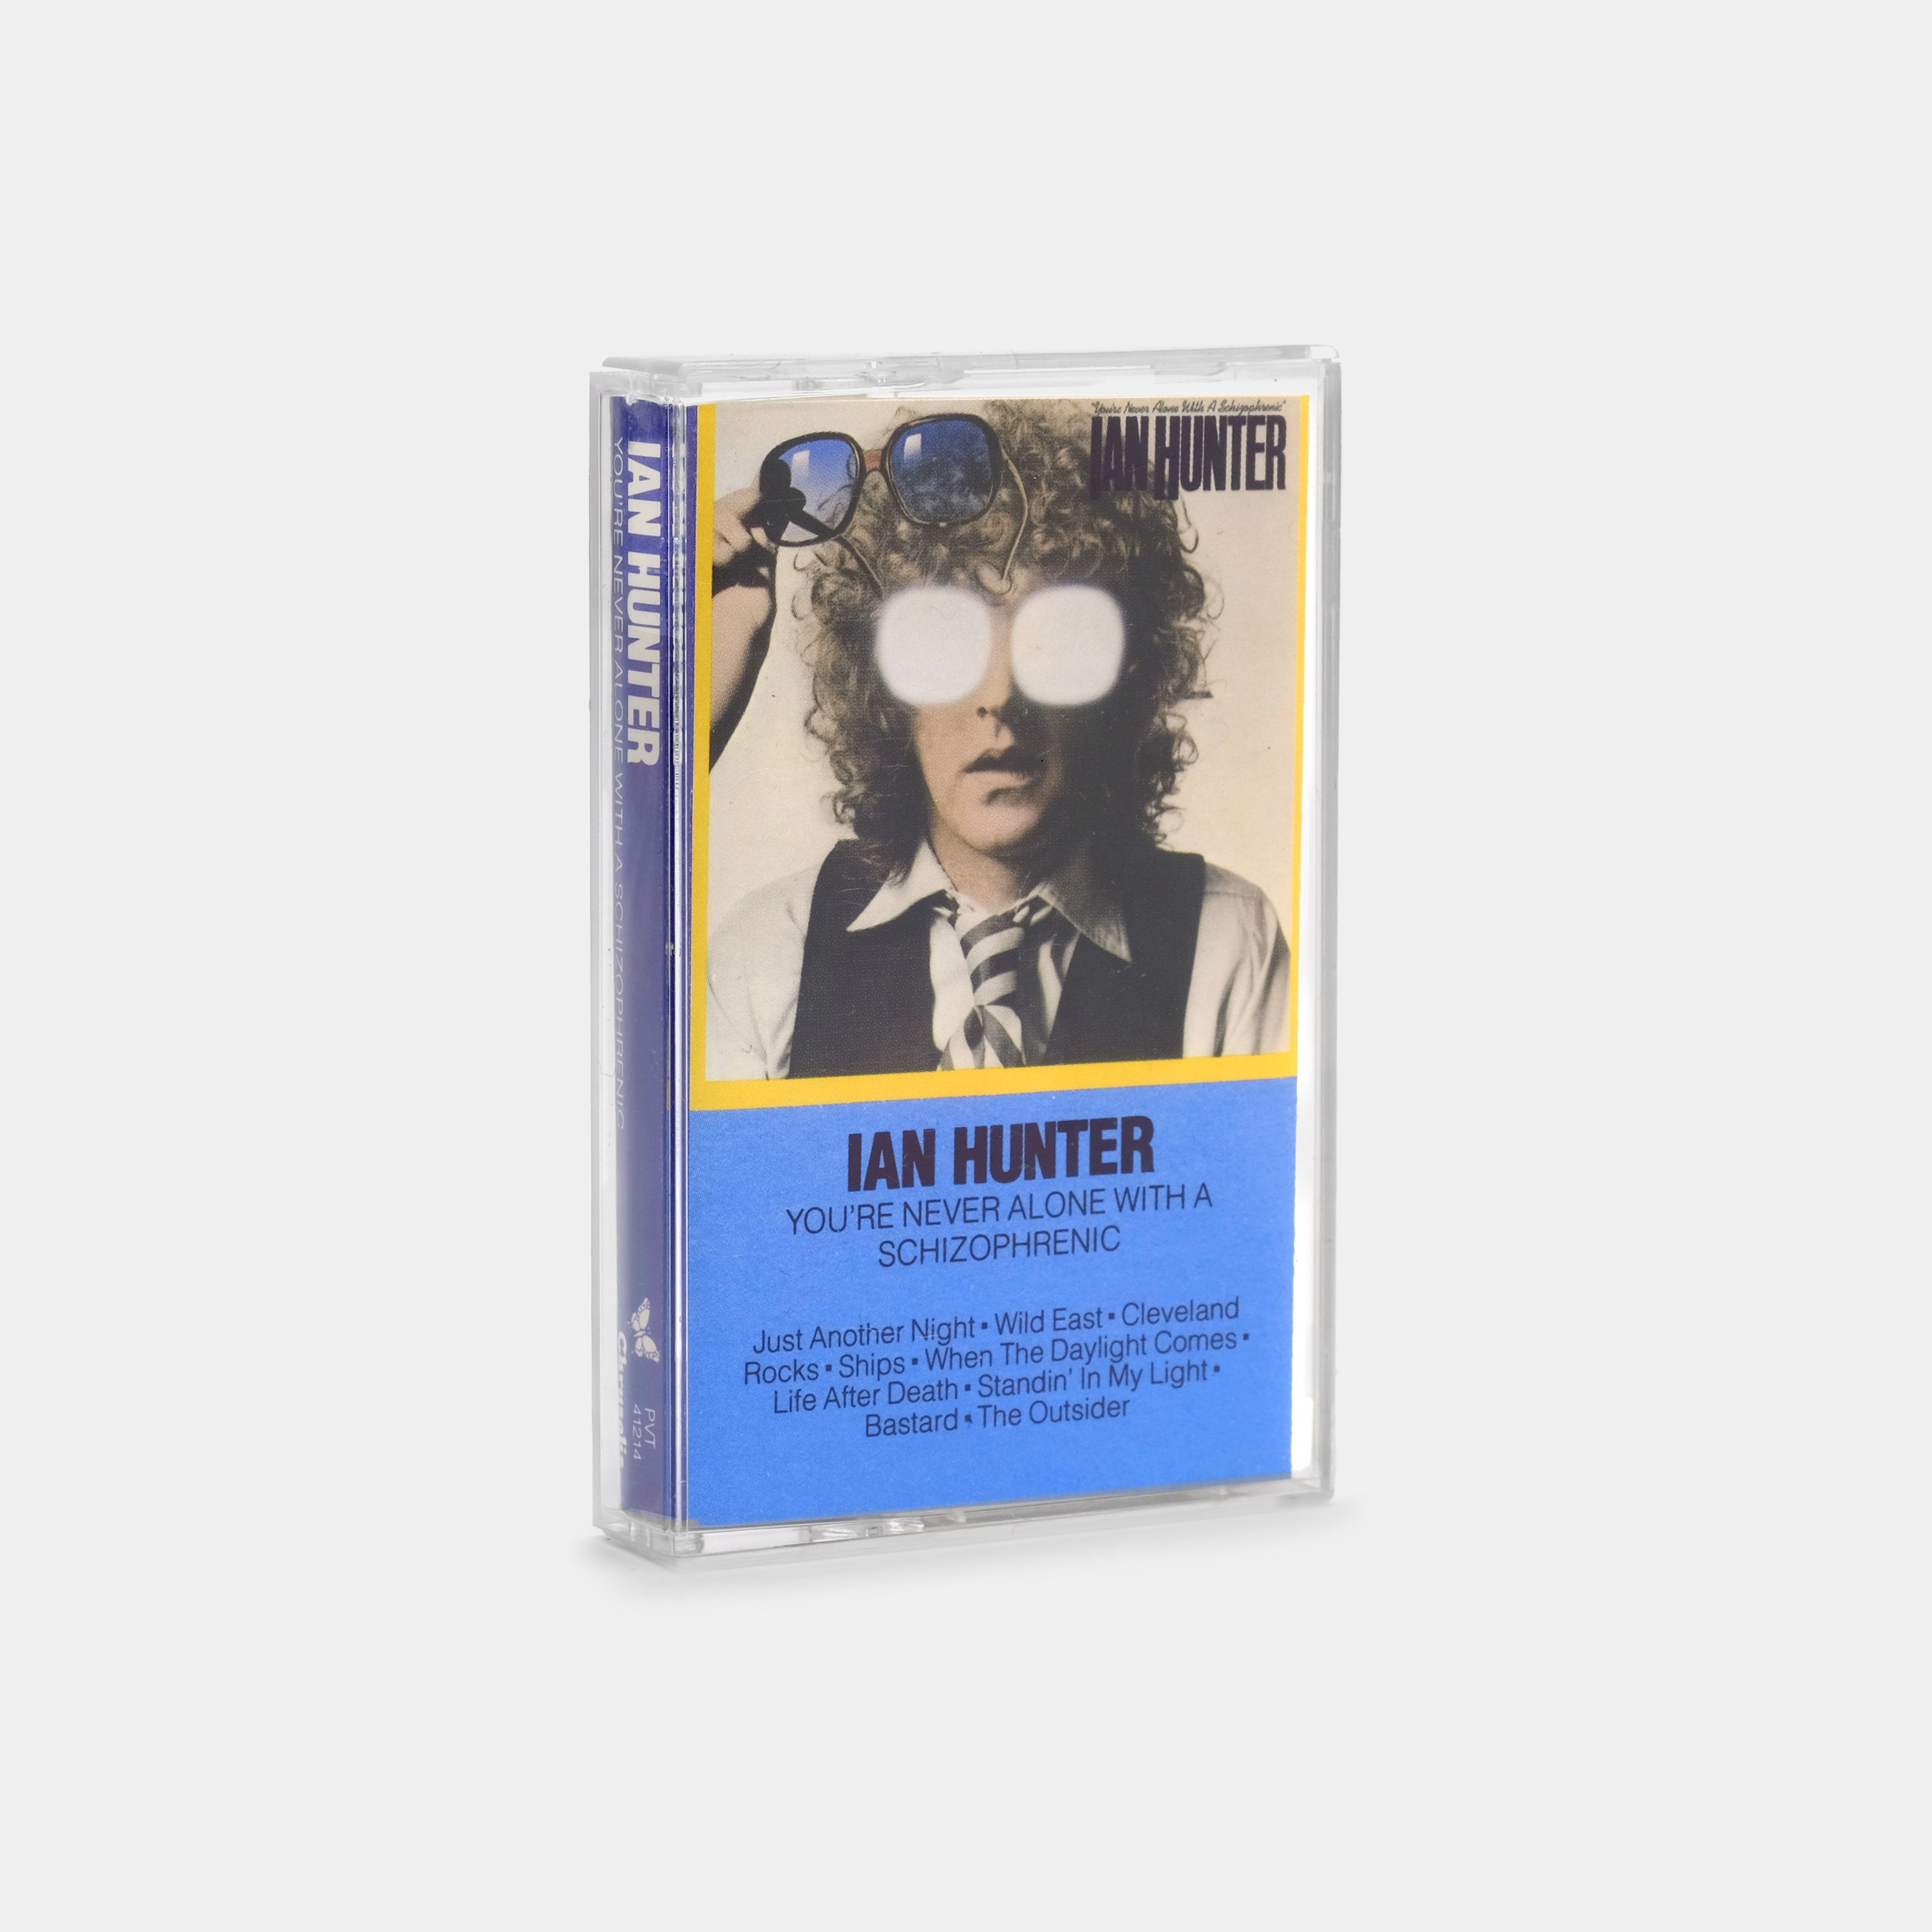 Ian Hunter - You're Never Alone With A Schizophrenic Cassette Tape